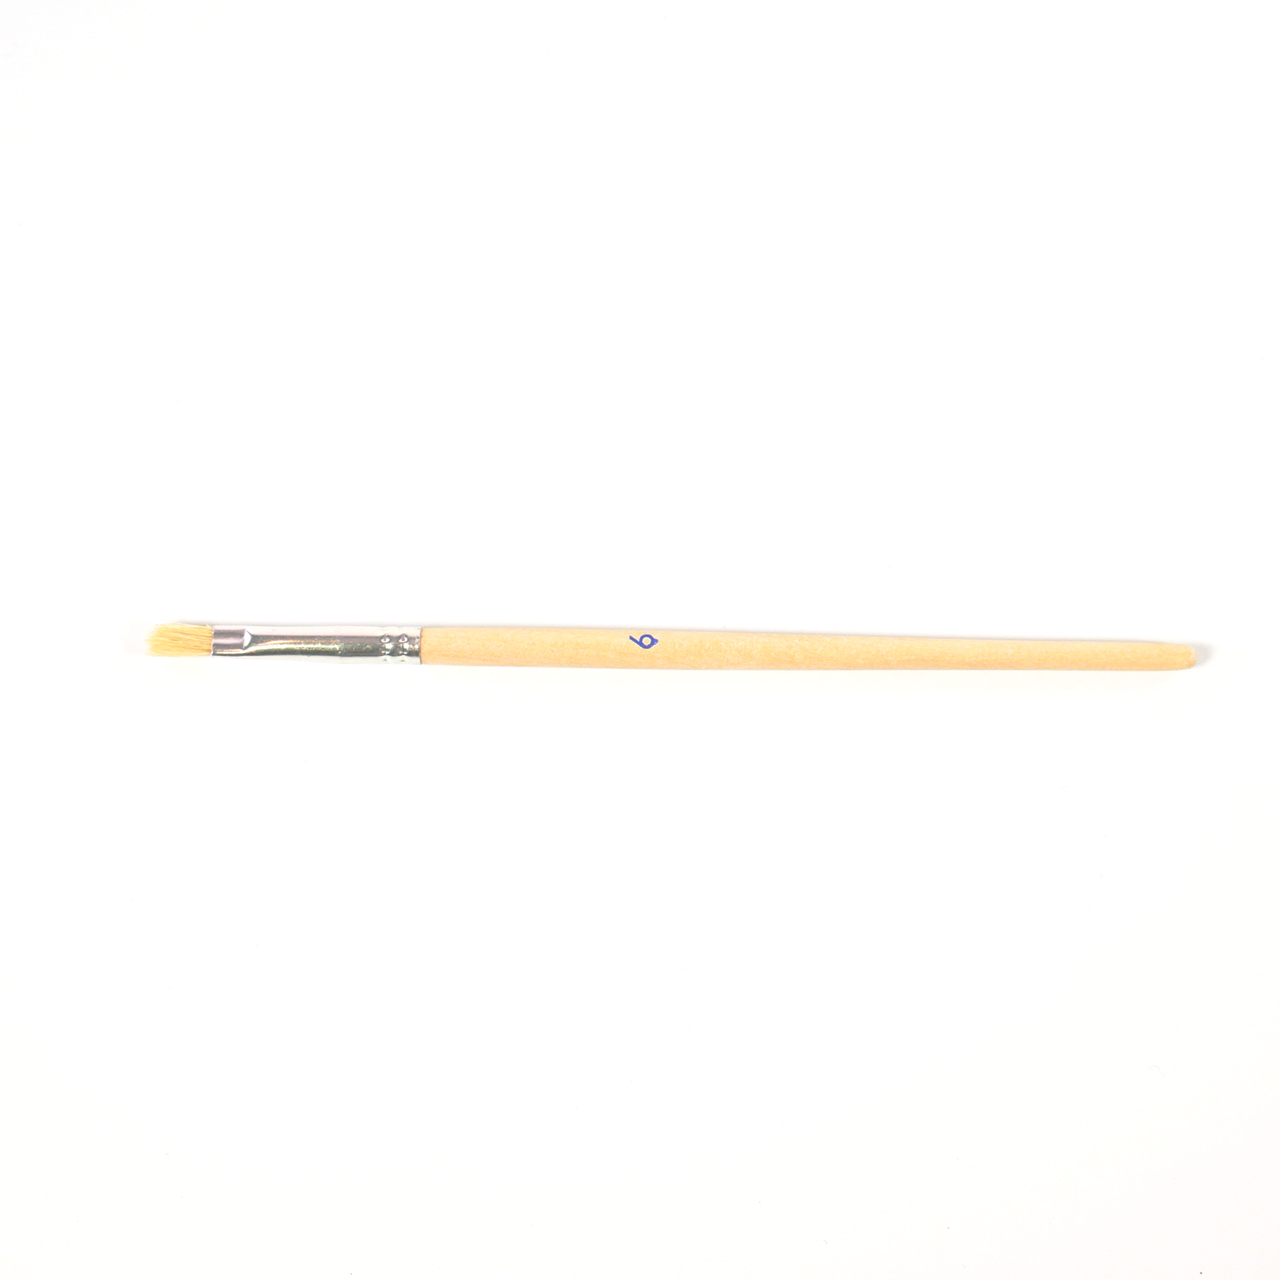 Brush with wooden shank 6 mm